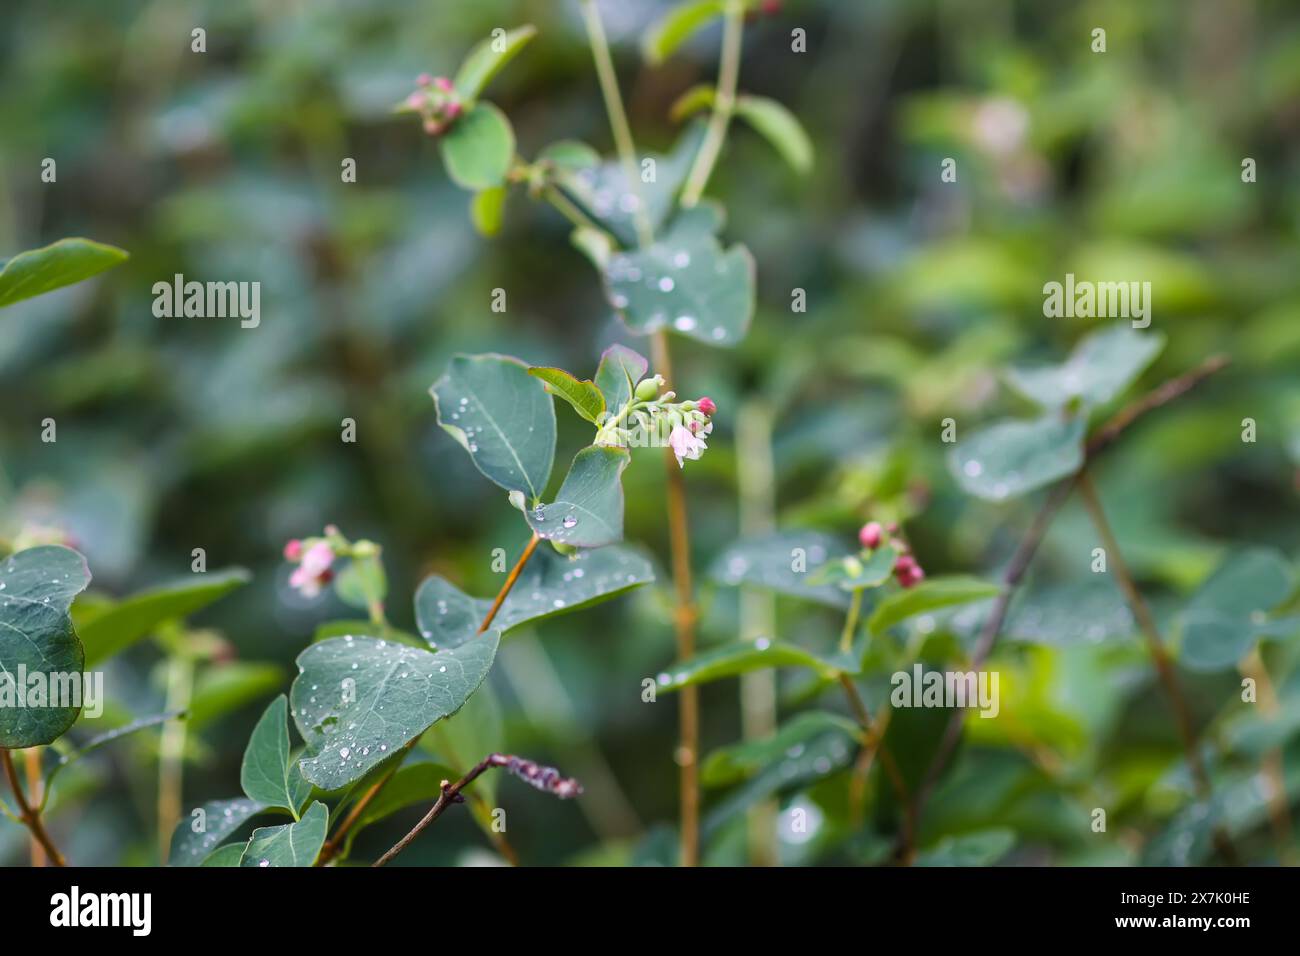 Rain drops on the leaves of the snowberry bush. Stock Photo